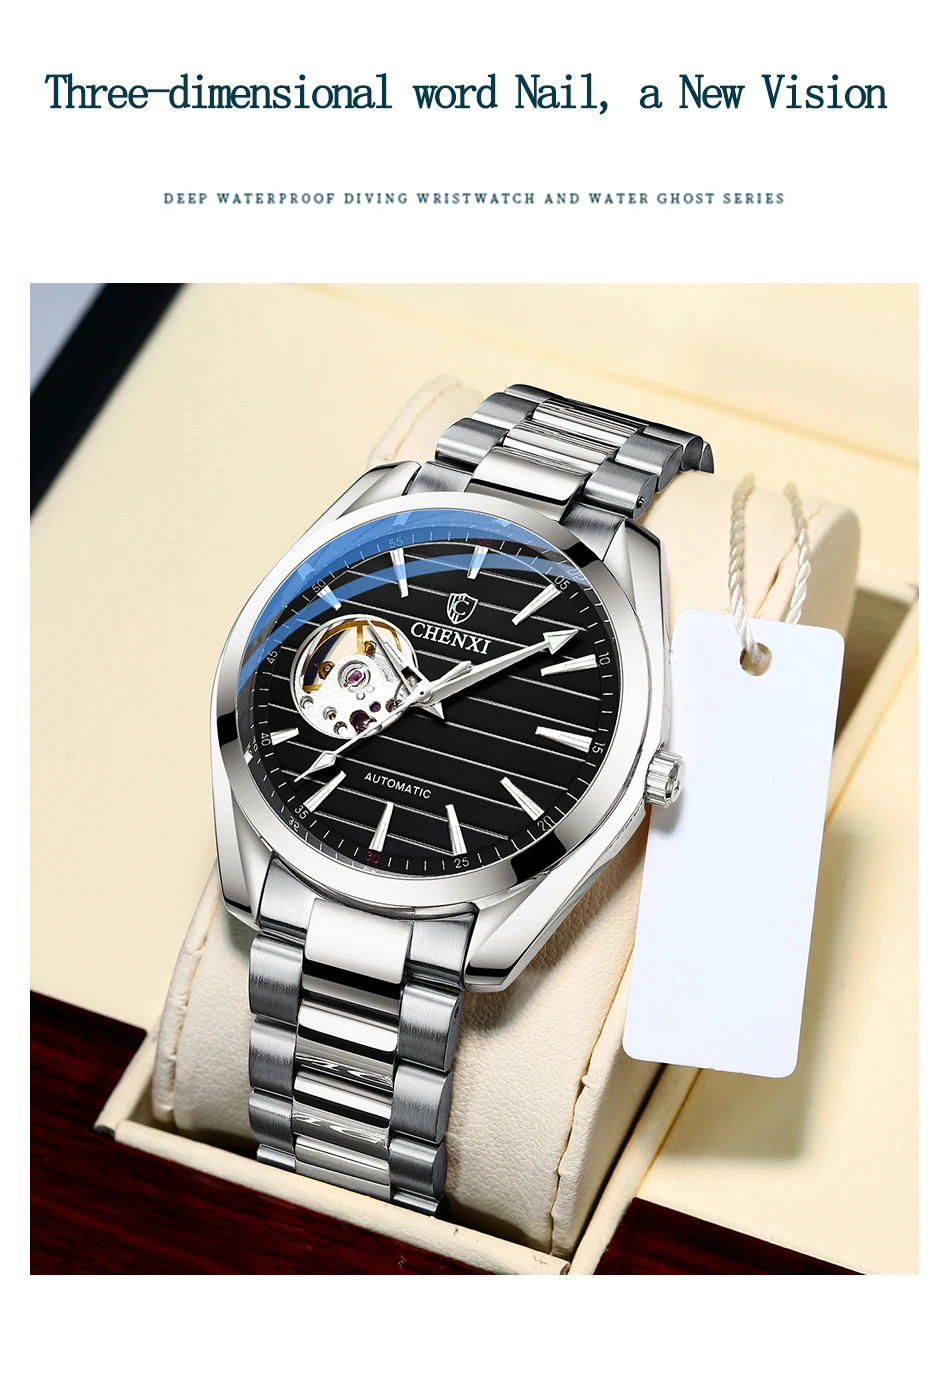 CHENXI Top Brand Watch Men Luxury Gold Stainless Steel Watches Sapphire Glass Automatic Mechanical Wristwatches 30M WaterproofTop Luxury Brand CHENXI 8806 New Men Automatic Mechanical Sapphire Glass Watch Stainless Steel Waterproof Mens Wristwatches